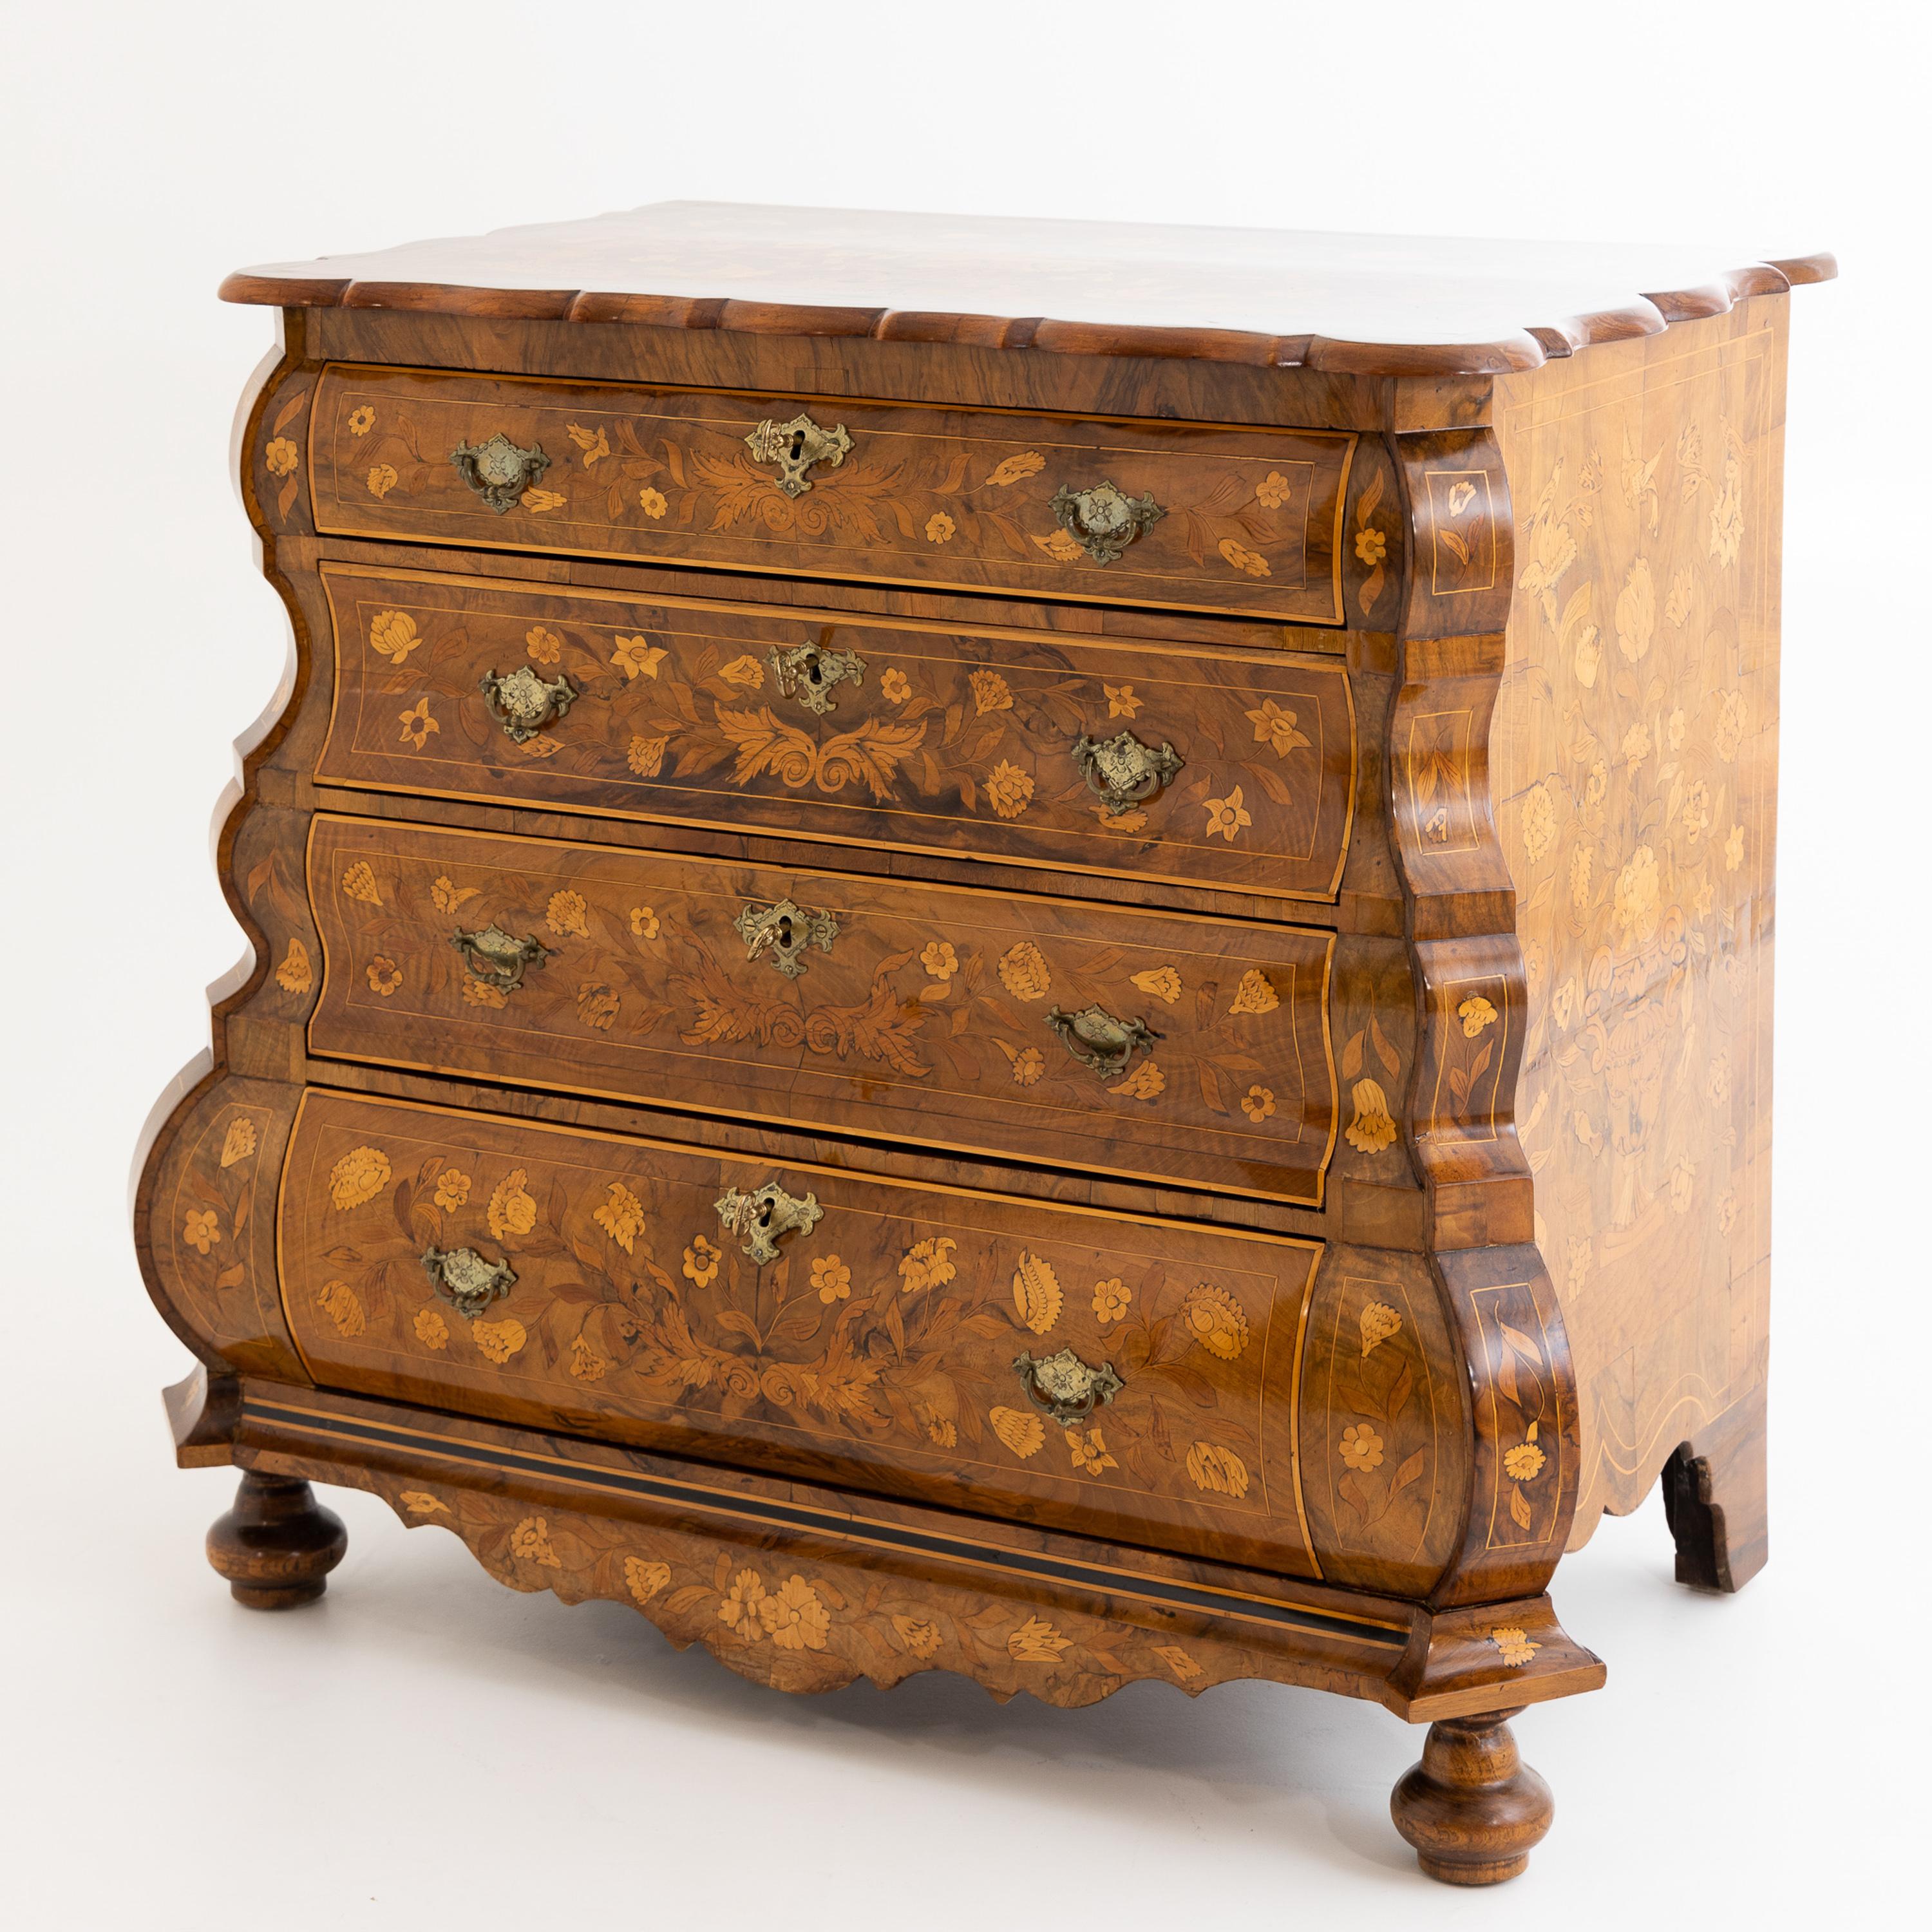 Dutch Baroque chest of drawers with four drawers on baluster feet at the front and bracketed feet at the back. The body is inlaid on all sides with floral marquetry. The top panel, corners and frame are typically curved. The chest of drawers has